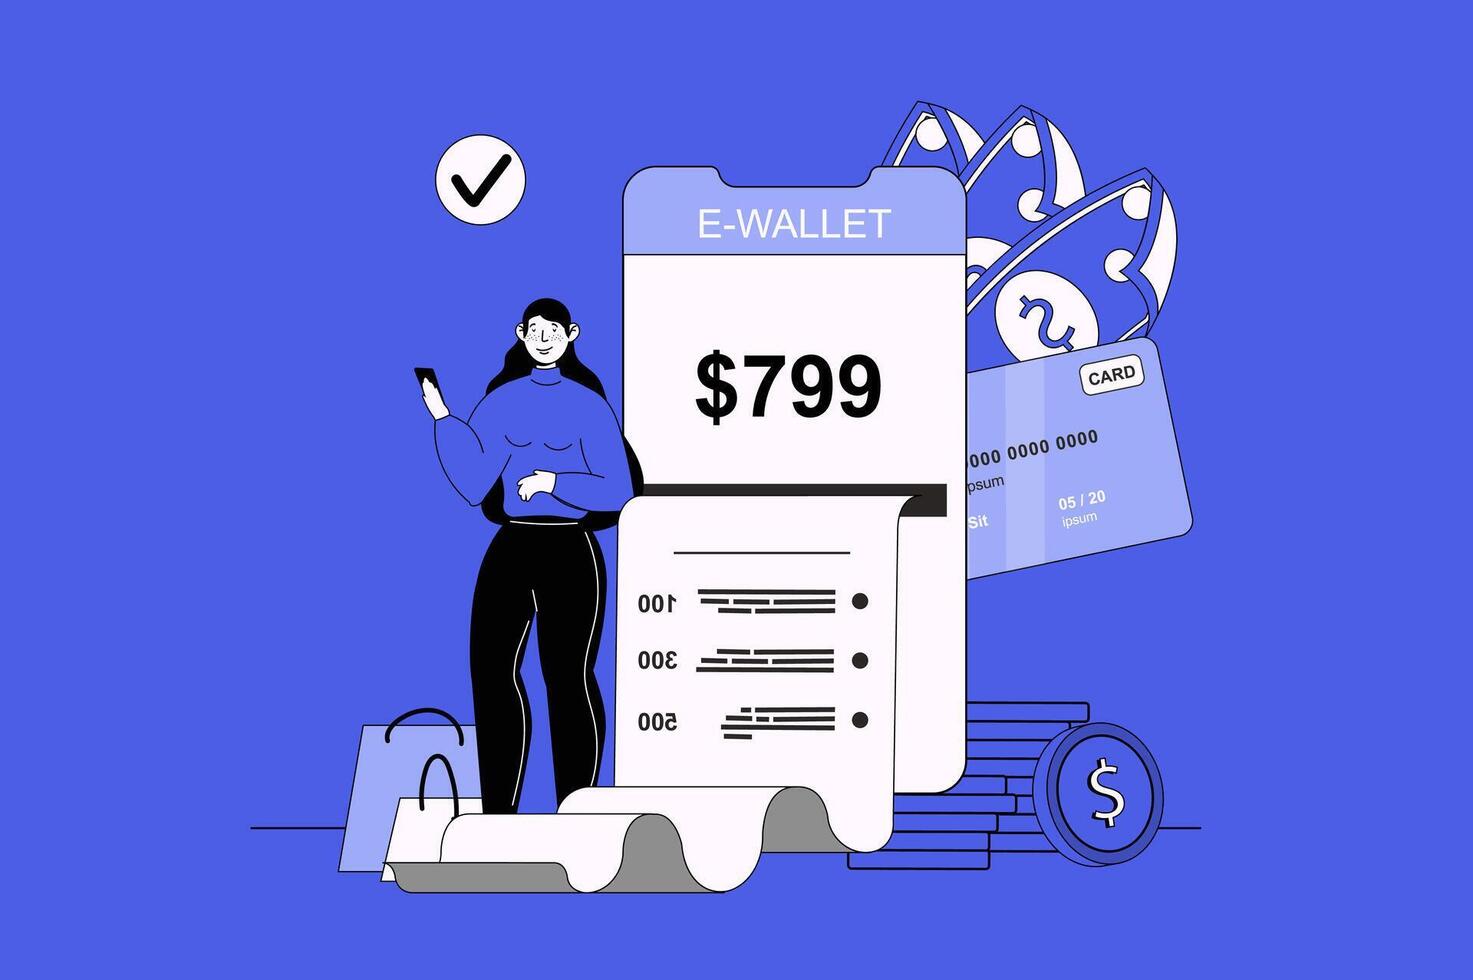 Online payment web concept with character scene in flat design. People make online transactions, using money transfer in app and paying bills. Vector illustration for social media marketing material.